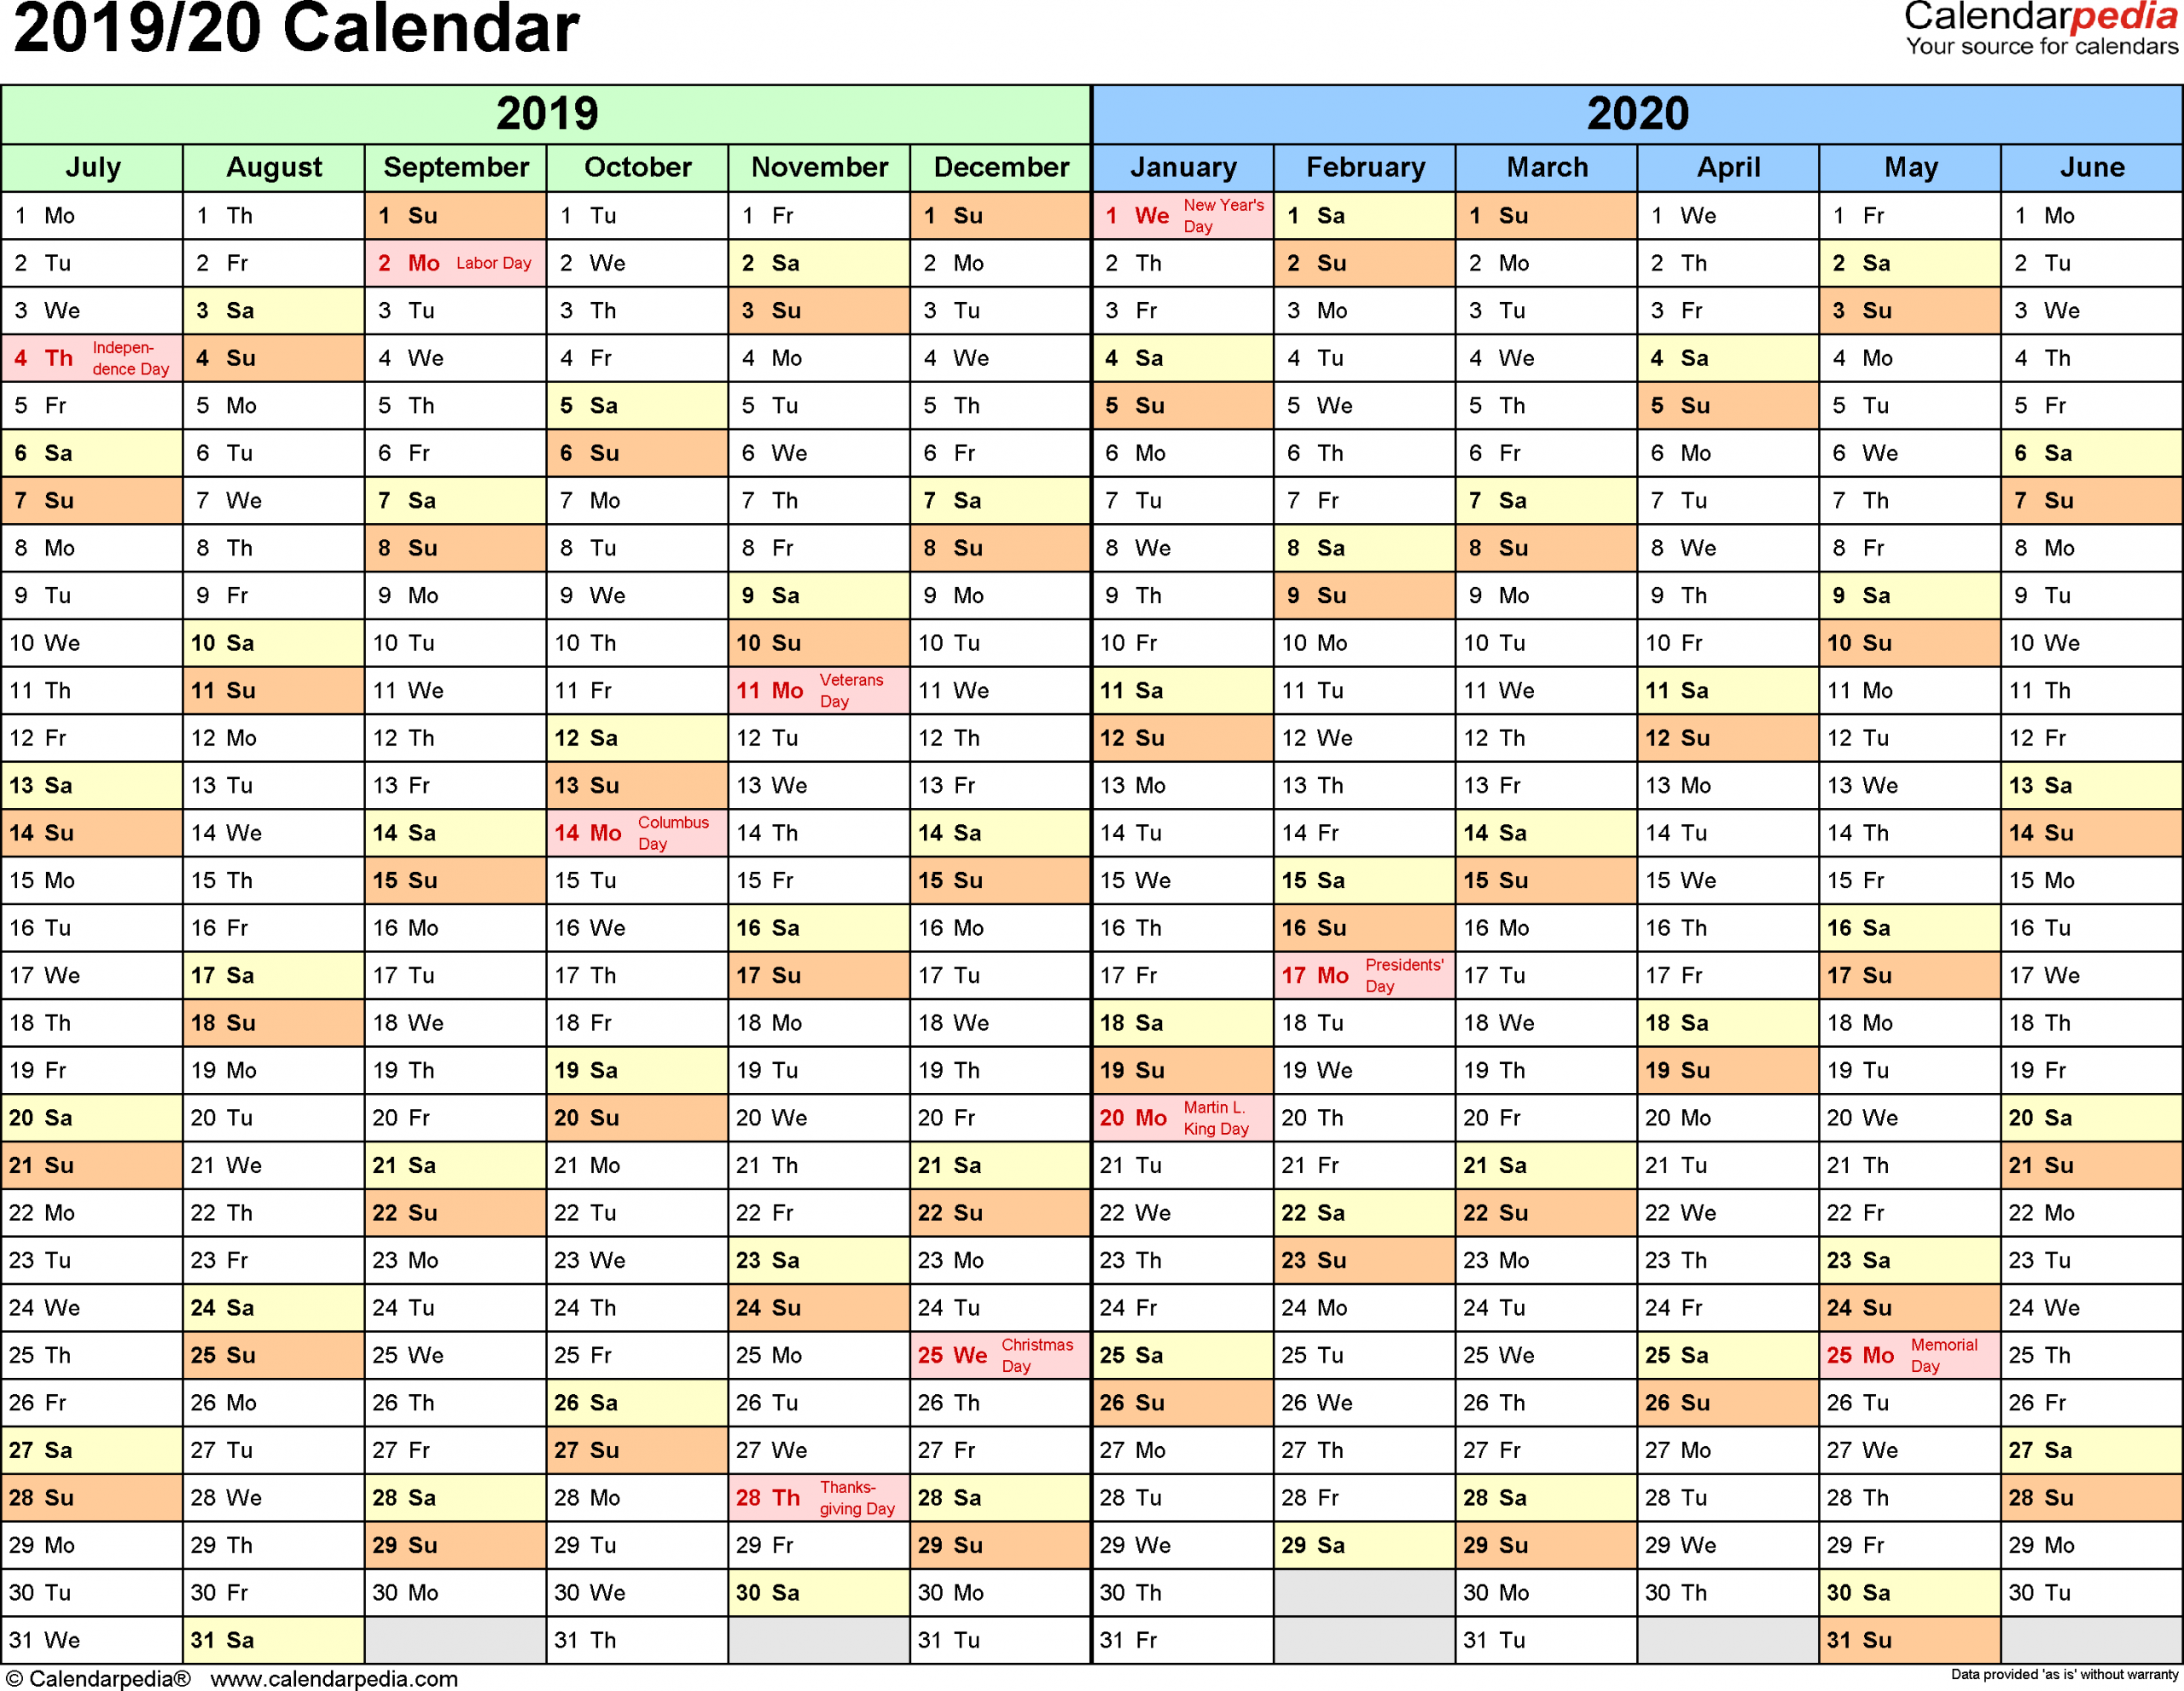 Split Year Calendars 2019/2020 (July To June) - Excel Templates